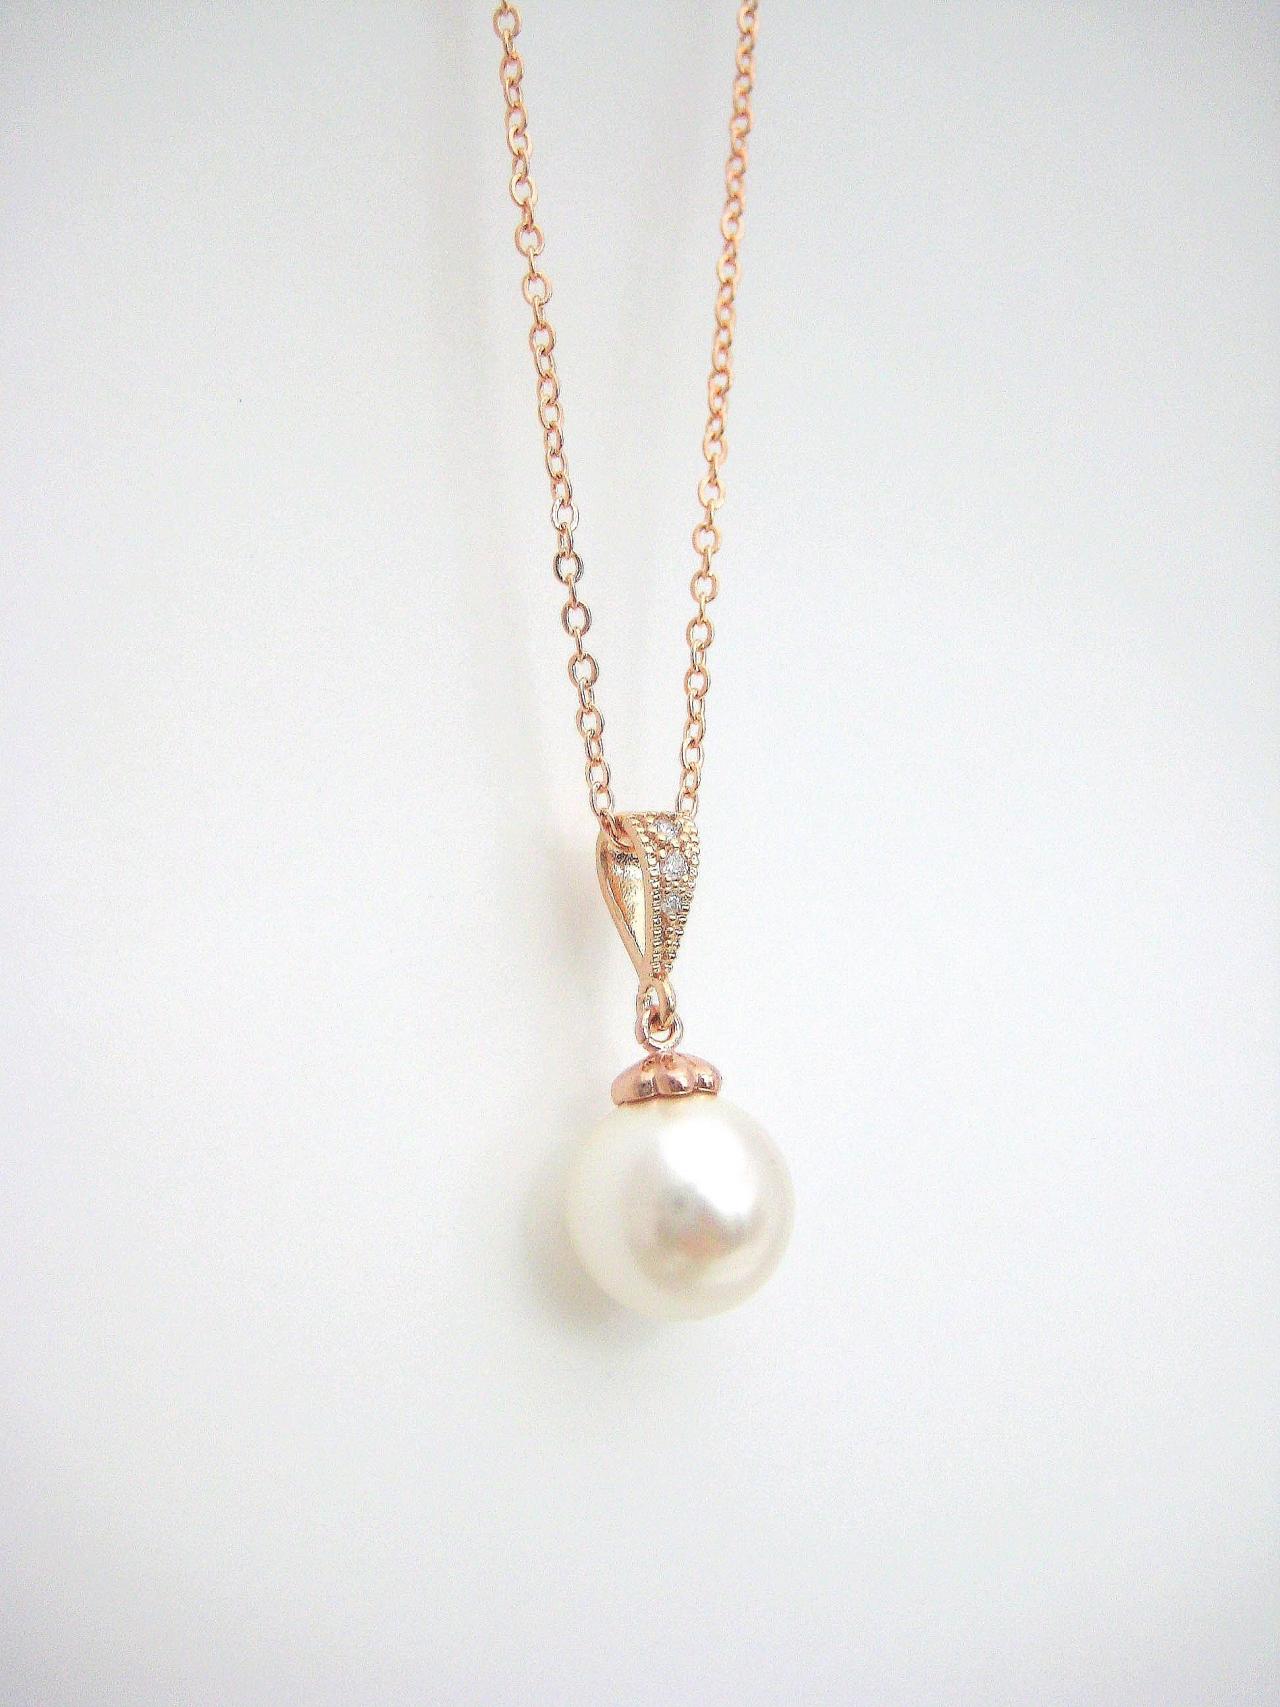 Rose Gold Bridal Pearl Necklace Wedding Pearl Necklace Rose Gold Necklace Swarovski 10mm Pearl Bridesmaid Gift Single Pearl Necklace (n053)